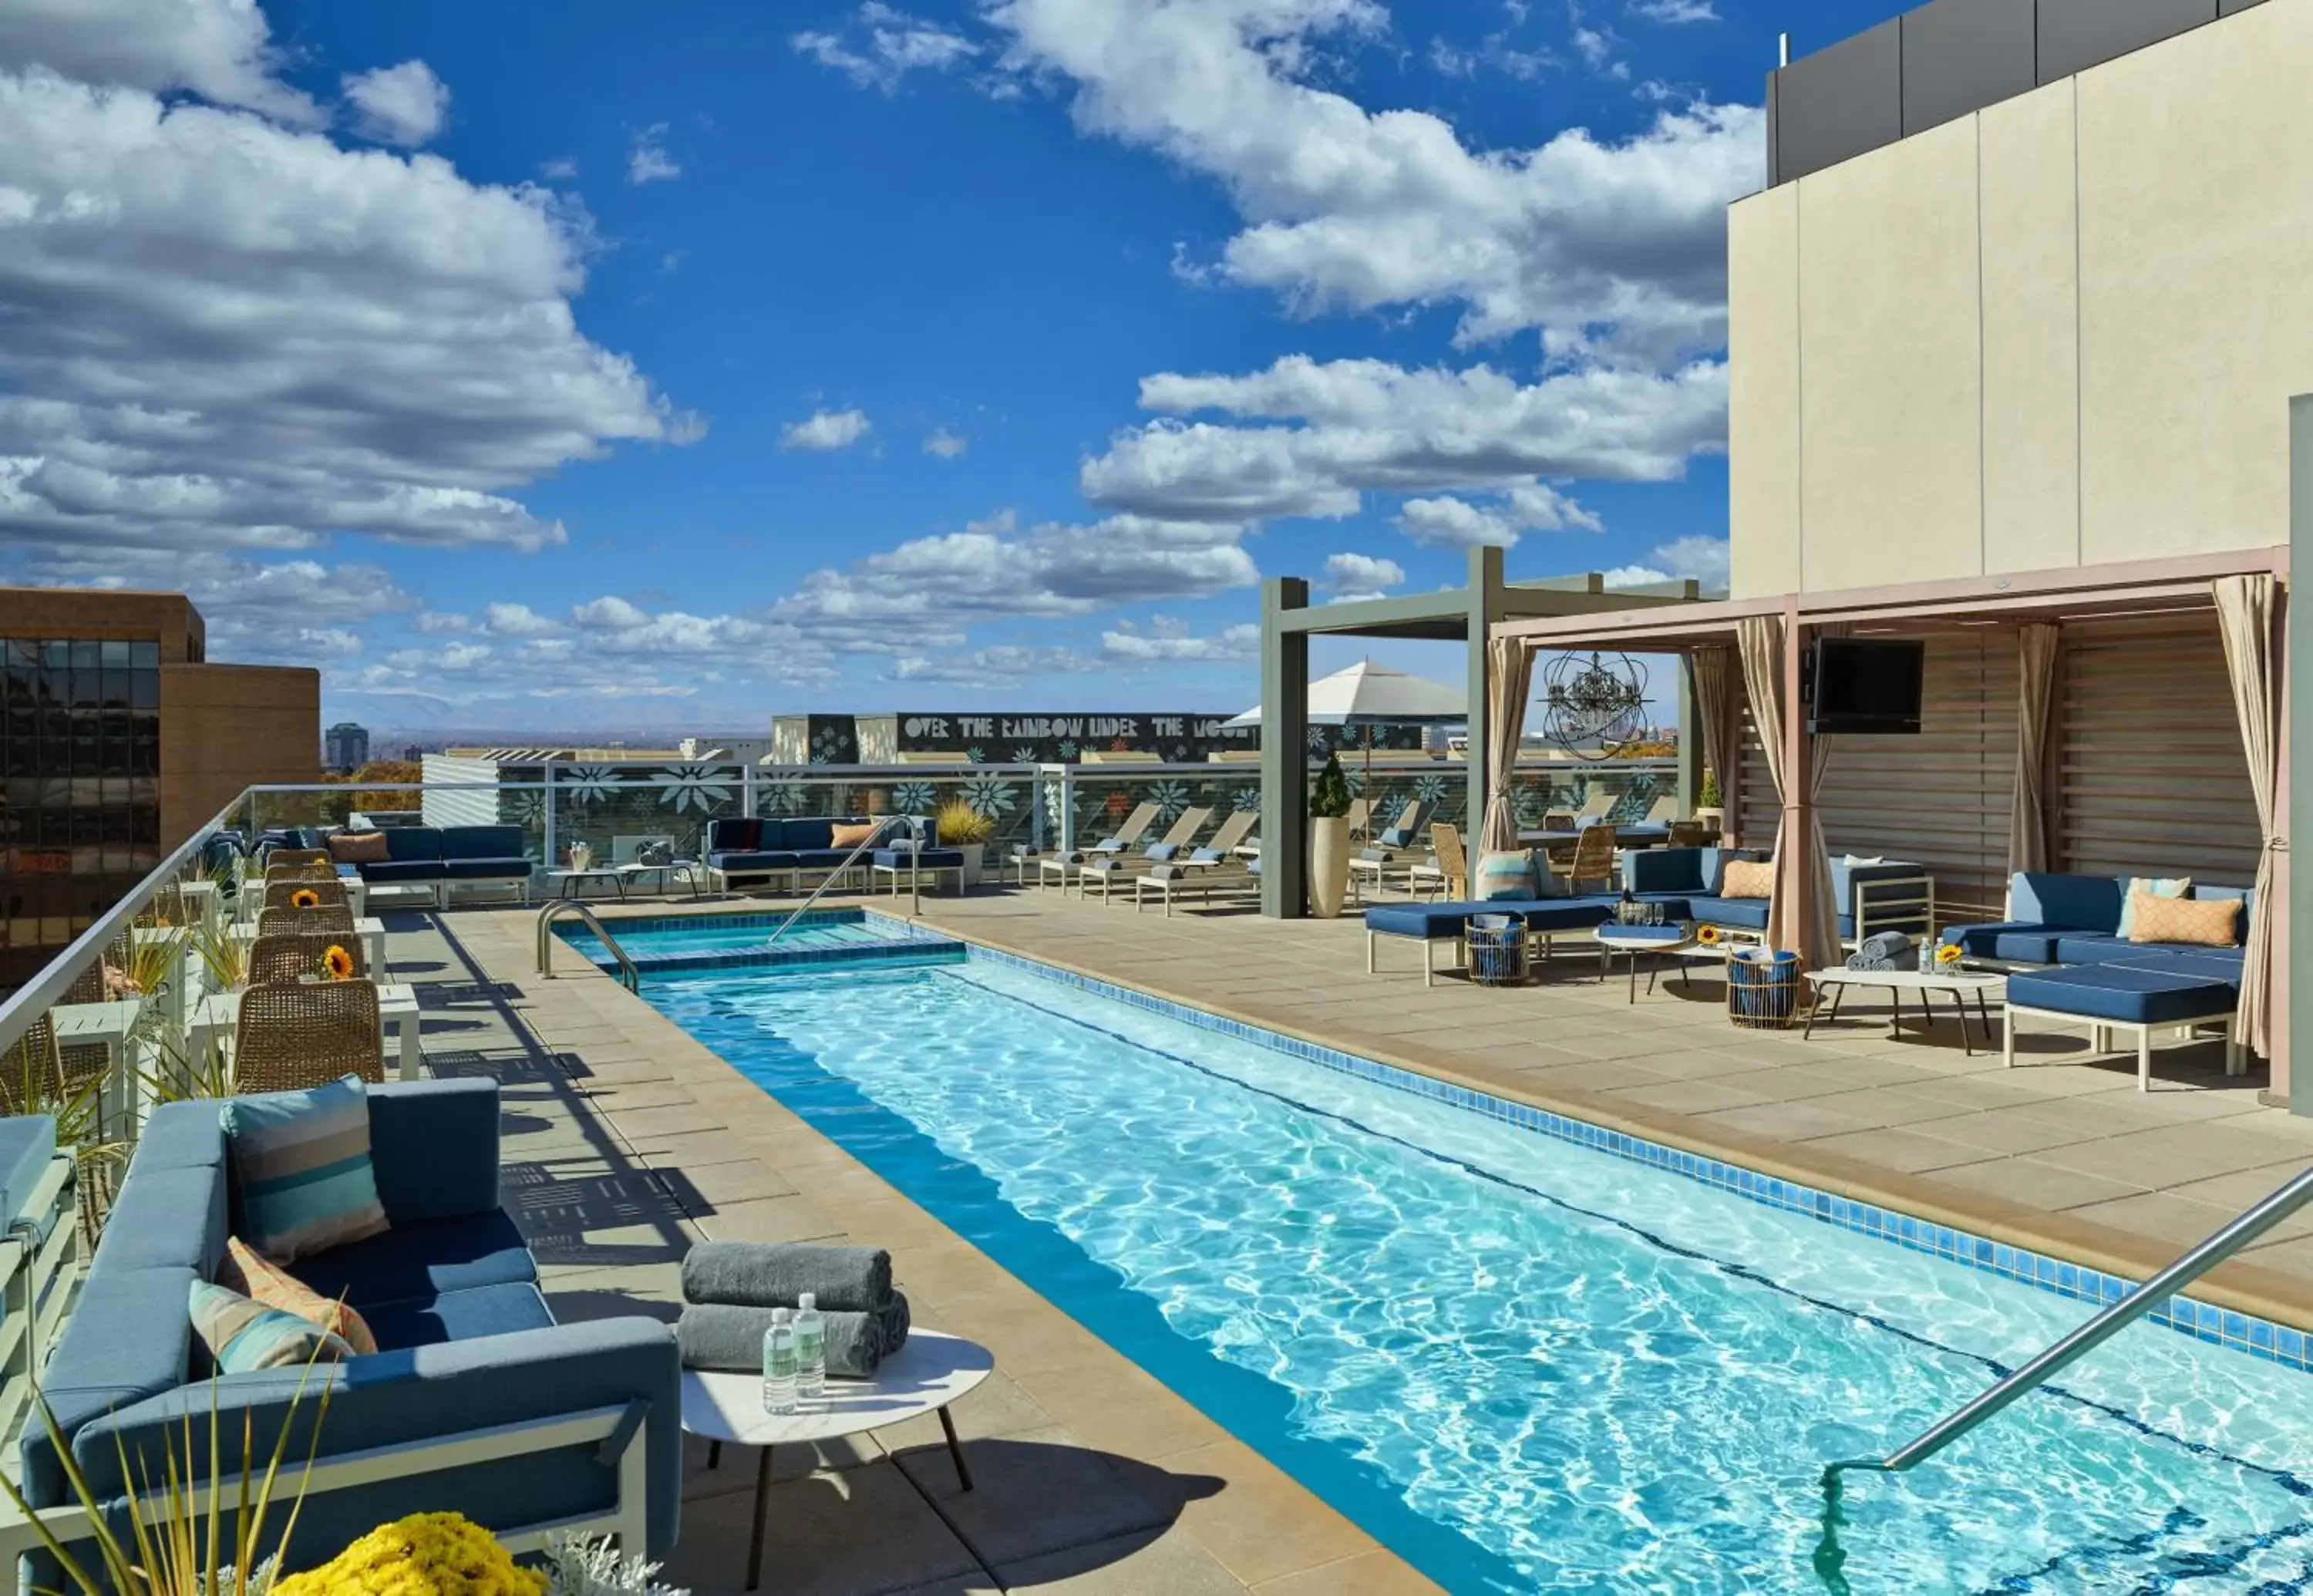 Swimming Pool in Halcyon - A Hotel in Cherry Creek